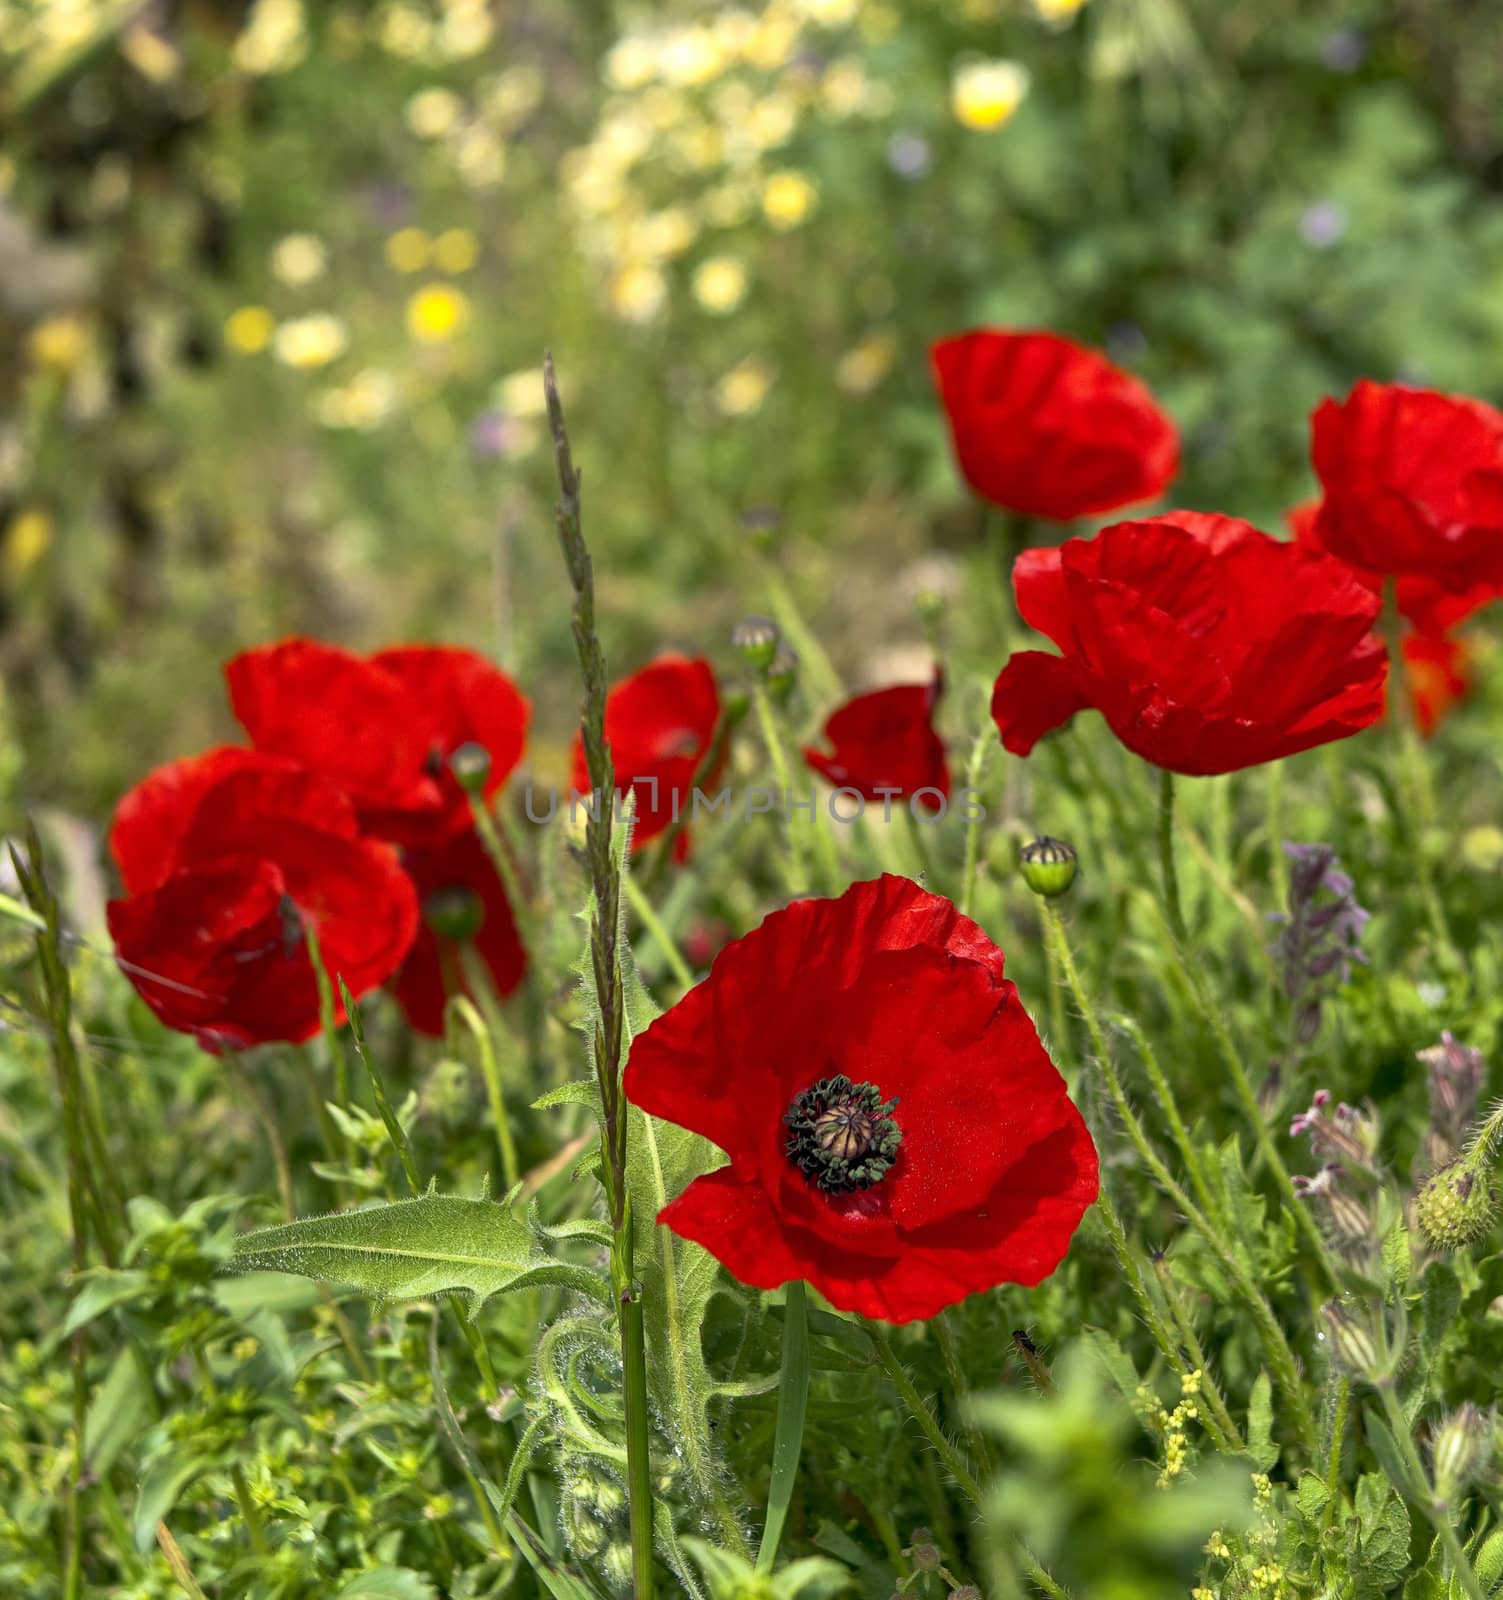 Red poppy flowers among green grass in Spring